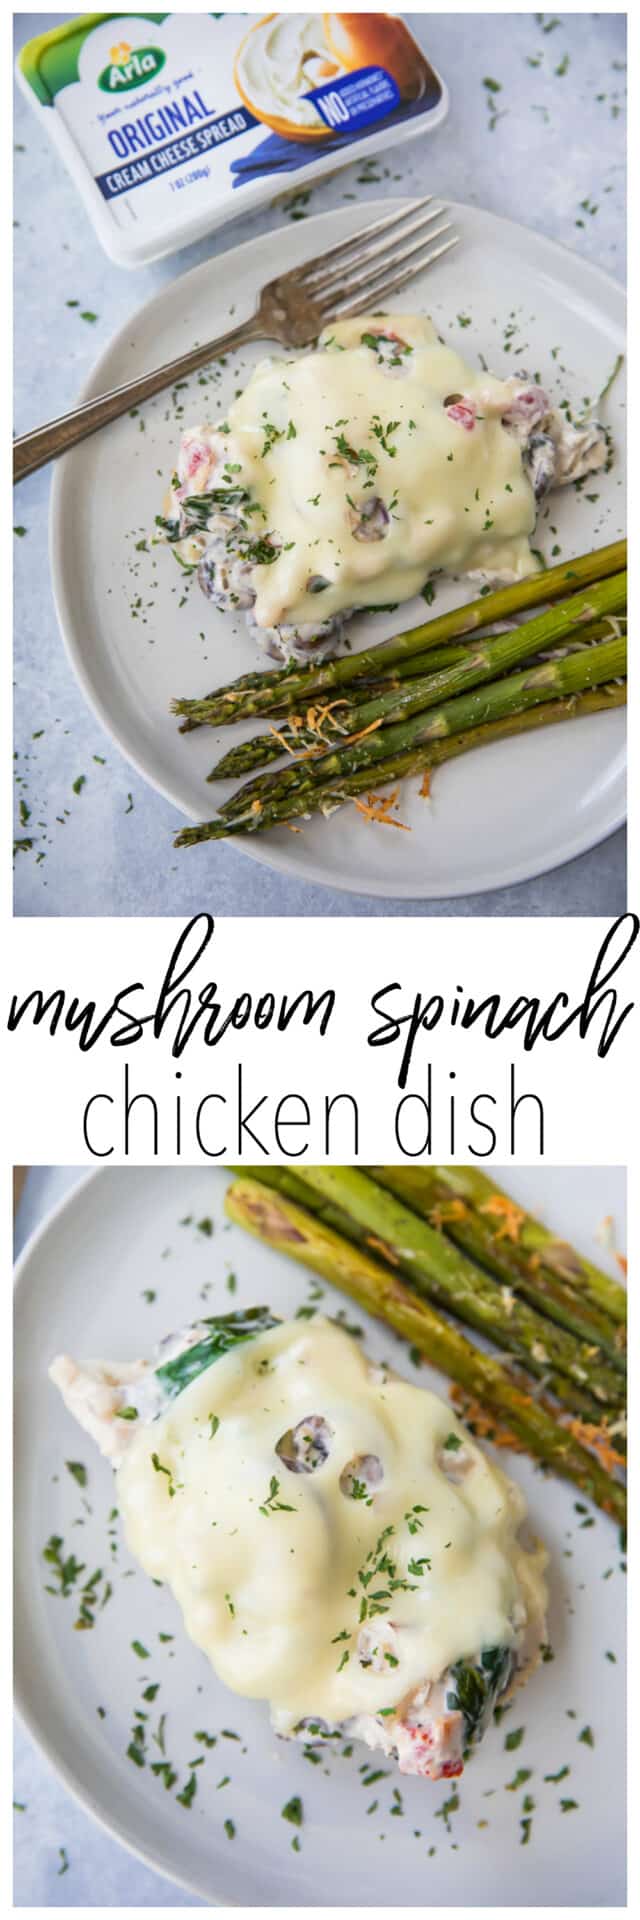 This Mushroom Spinach Chicken Dish is packed with tons of flavor and may just be one of the best baked chicken recipes you will every try! It makes the perfect weeknight comfort meal that is cheesy and delicious with even tastier leftovers! Serve with veggies or a side salad for a complete meal!